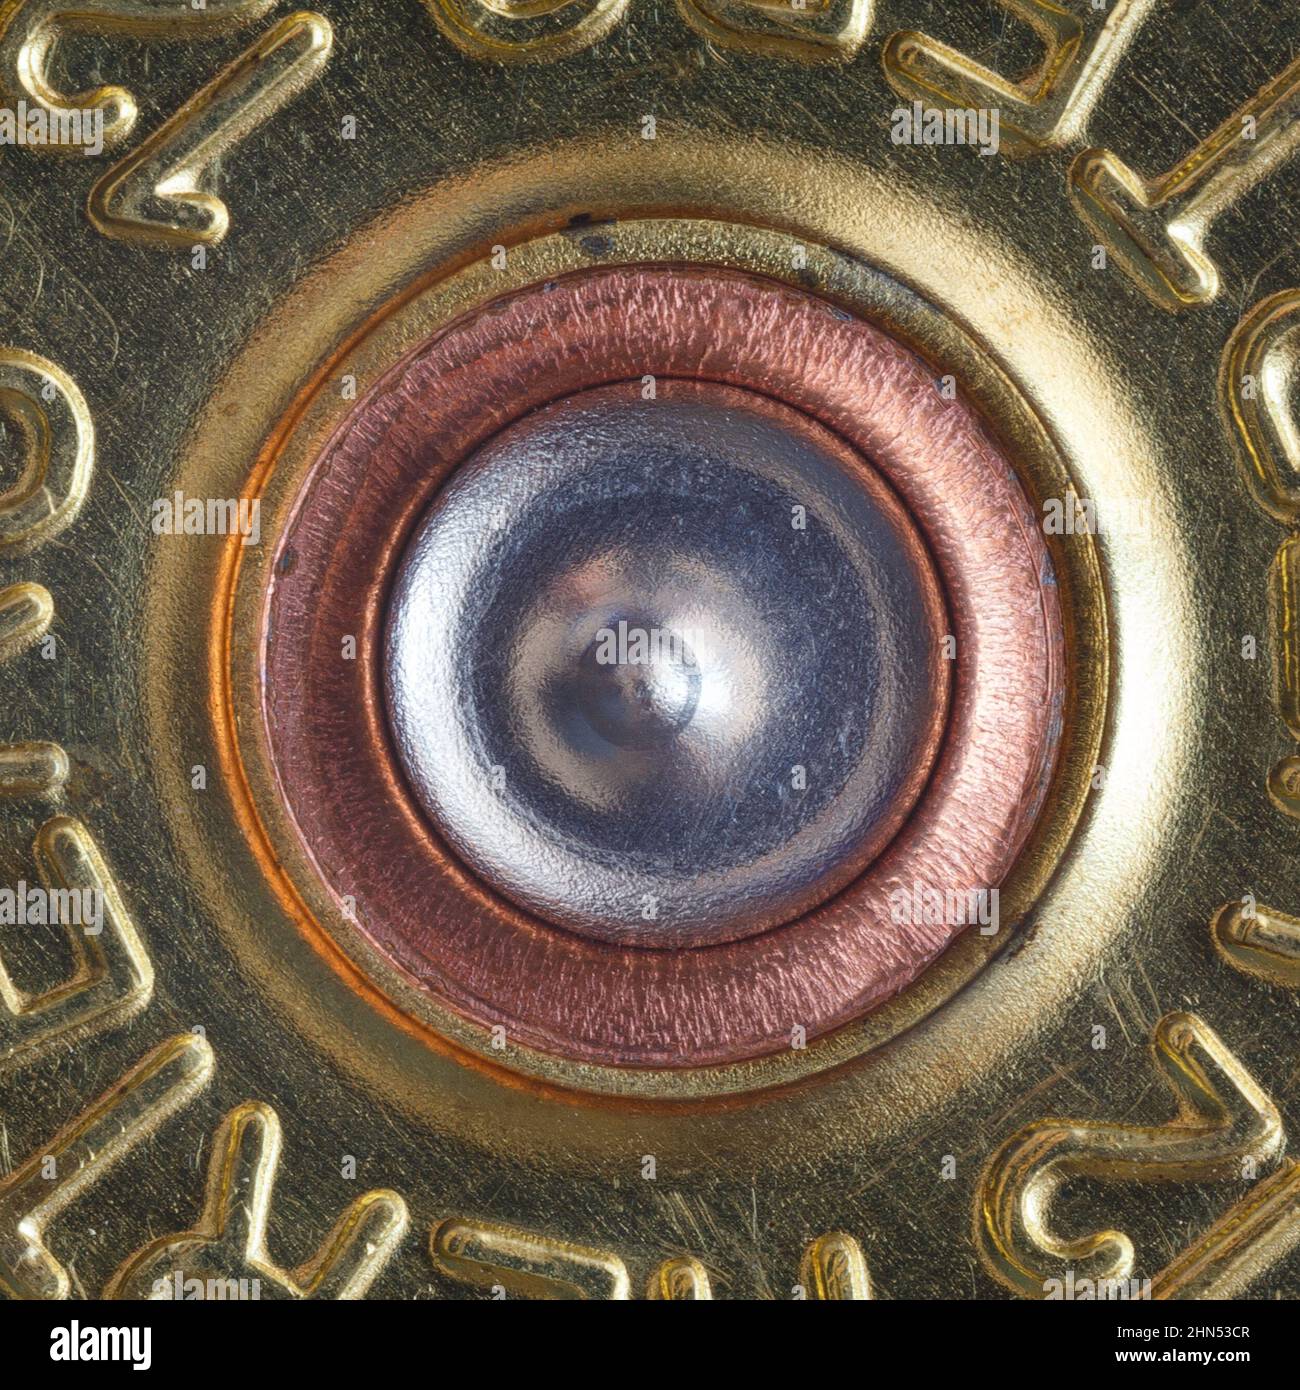 A pierced primer in a 12 gauge case from a hunting rifle. macro photography Stock Photo